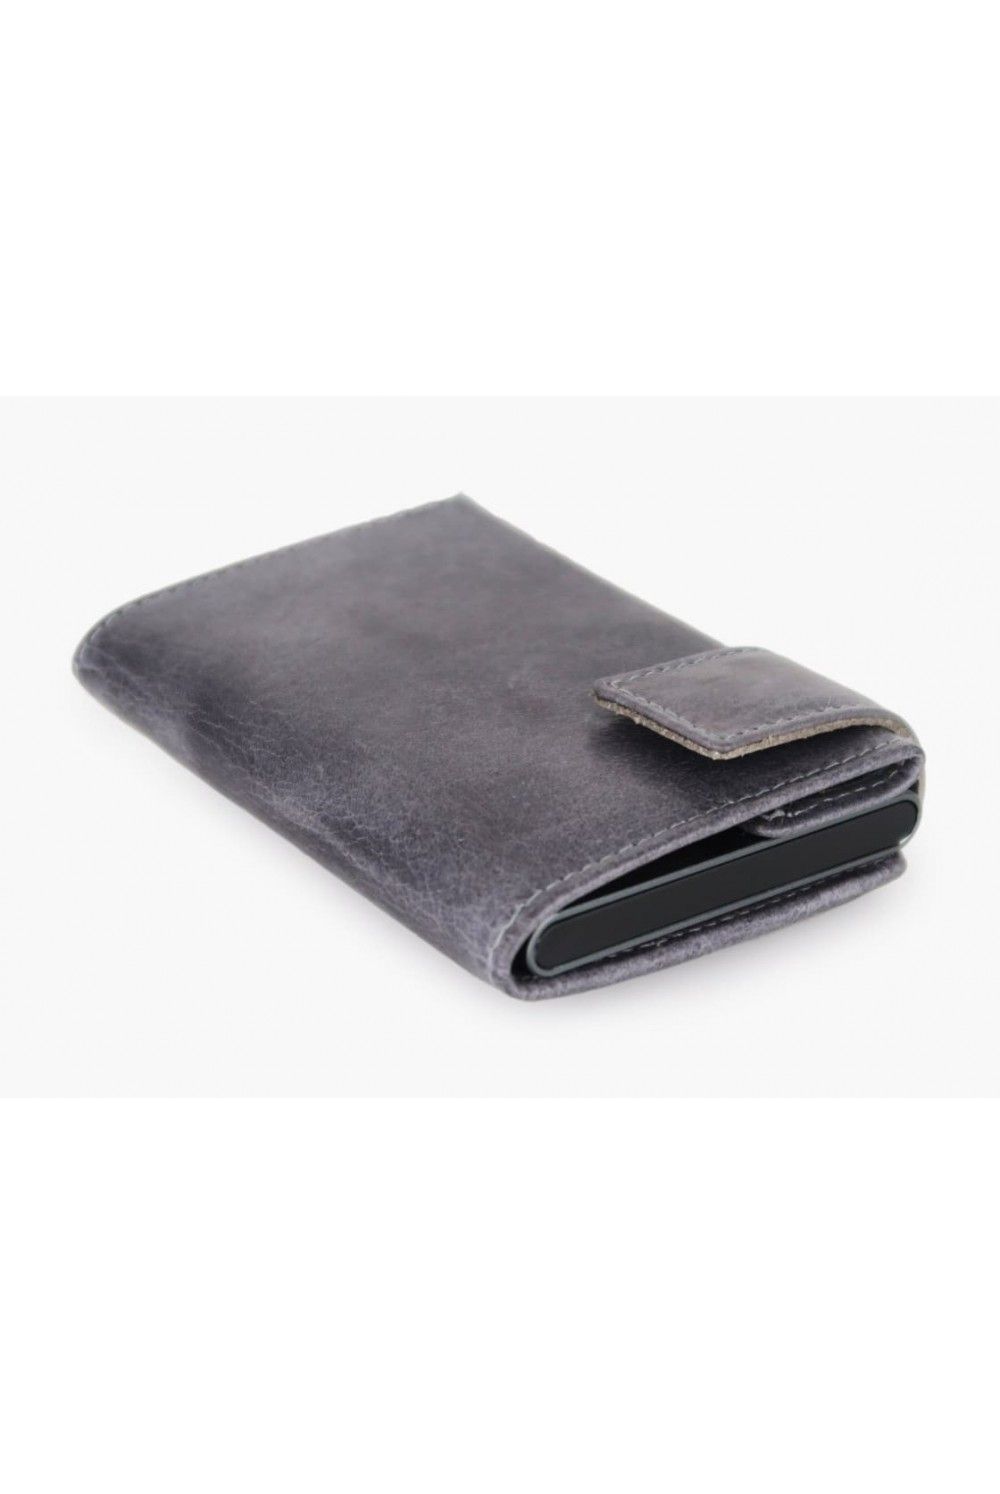 SecWal Card Case RV Leather Vintage gray